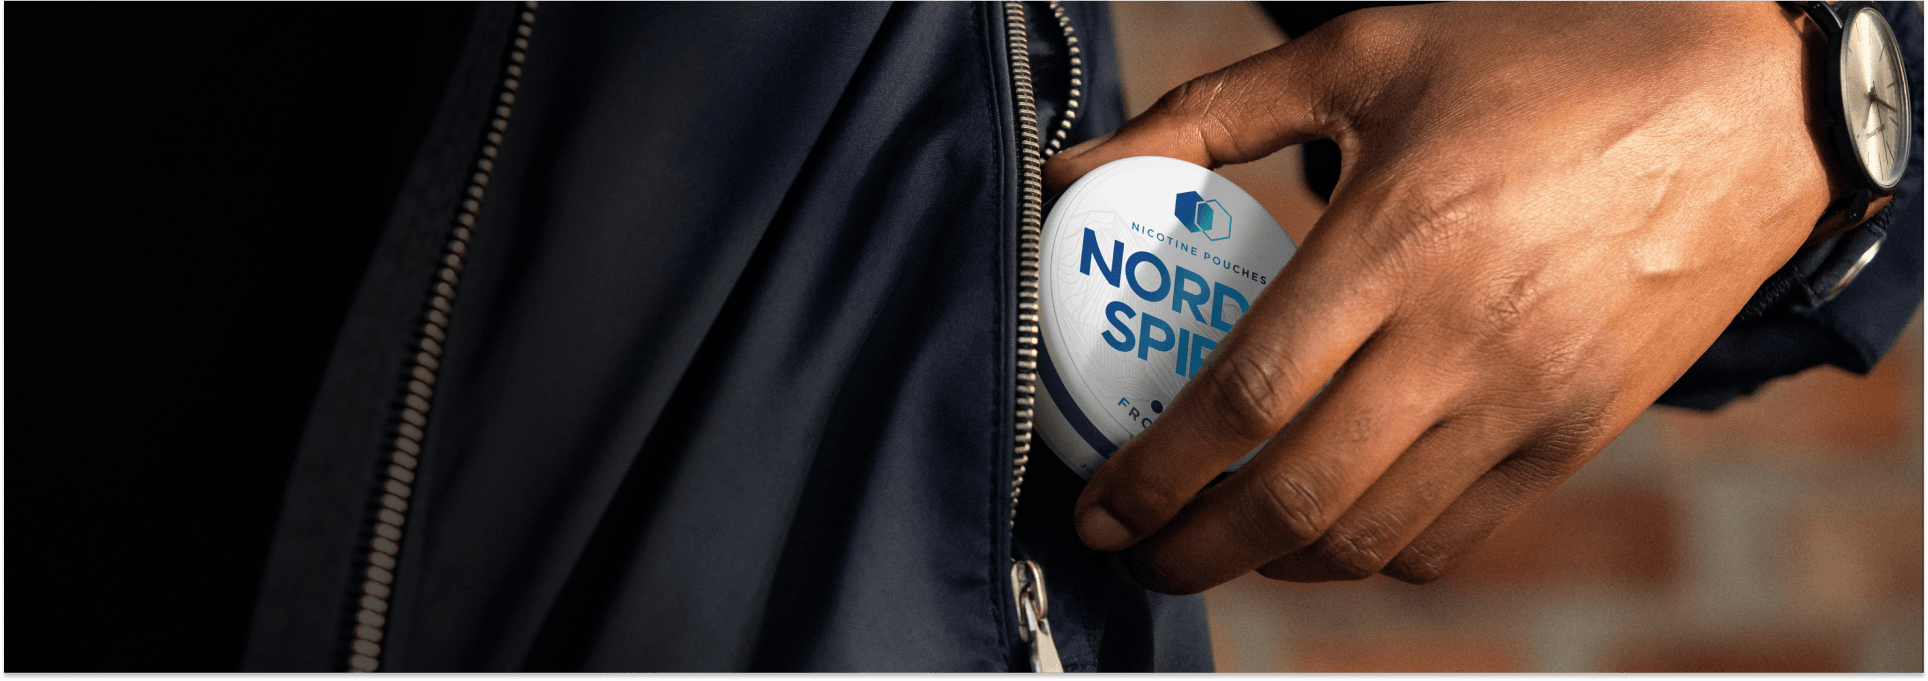 Try Nordic Spirit for free